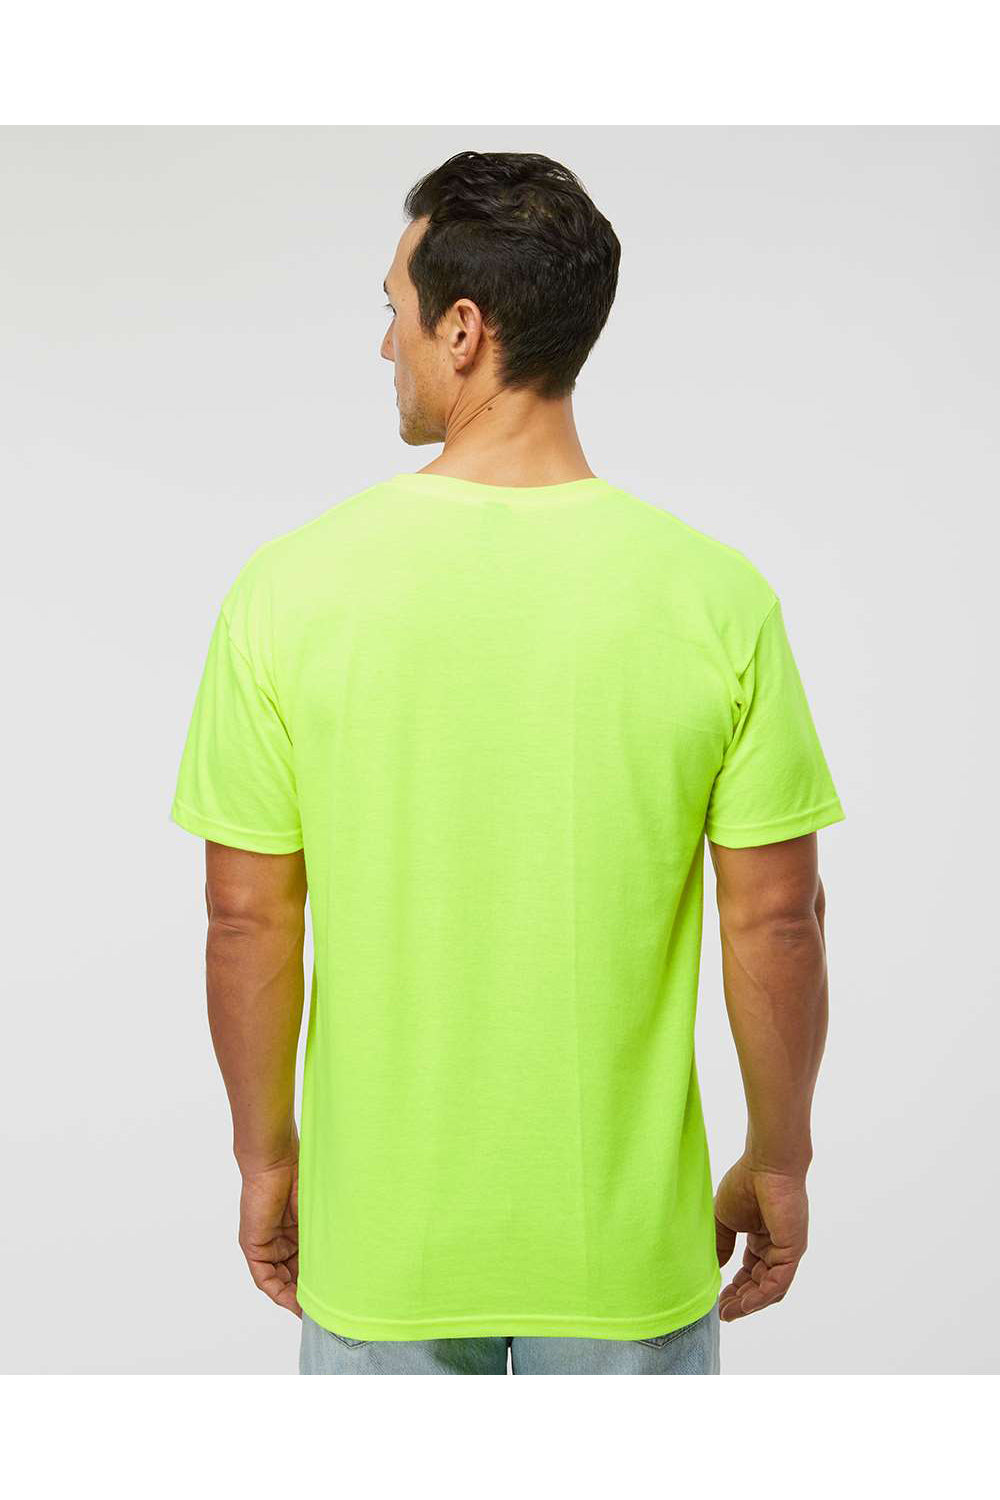 M&O 4800 Mens Gold Soft Touch Short Sleeve Crewneck T-Shirt Safety Green Model Back